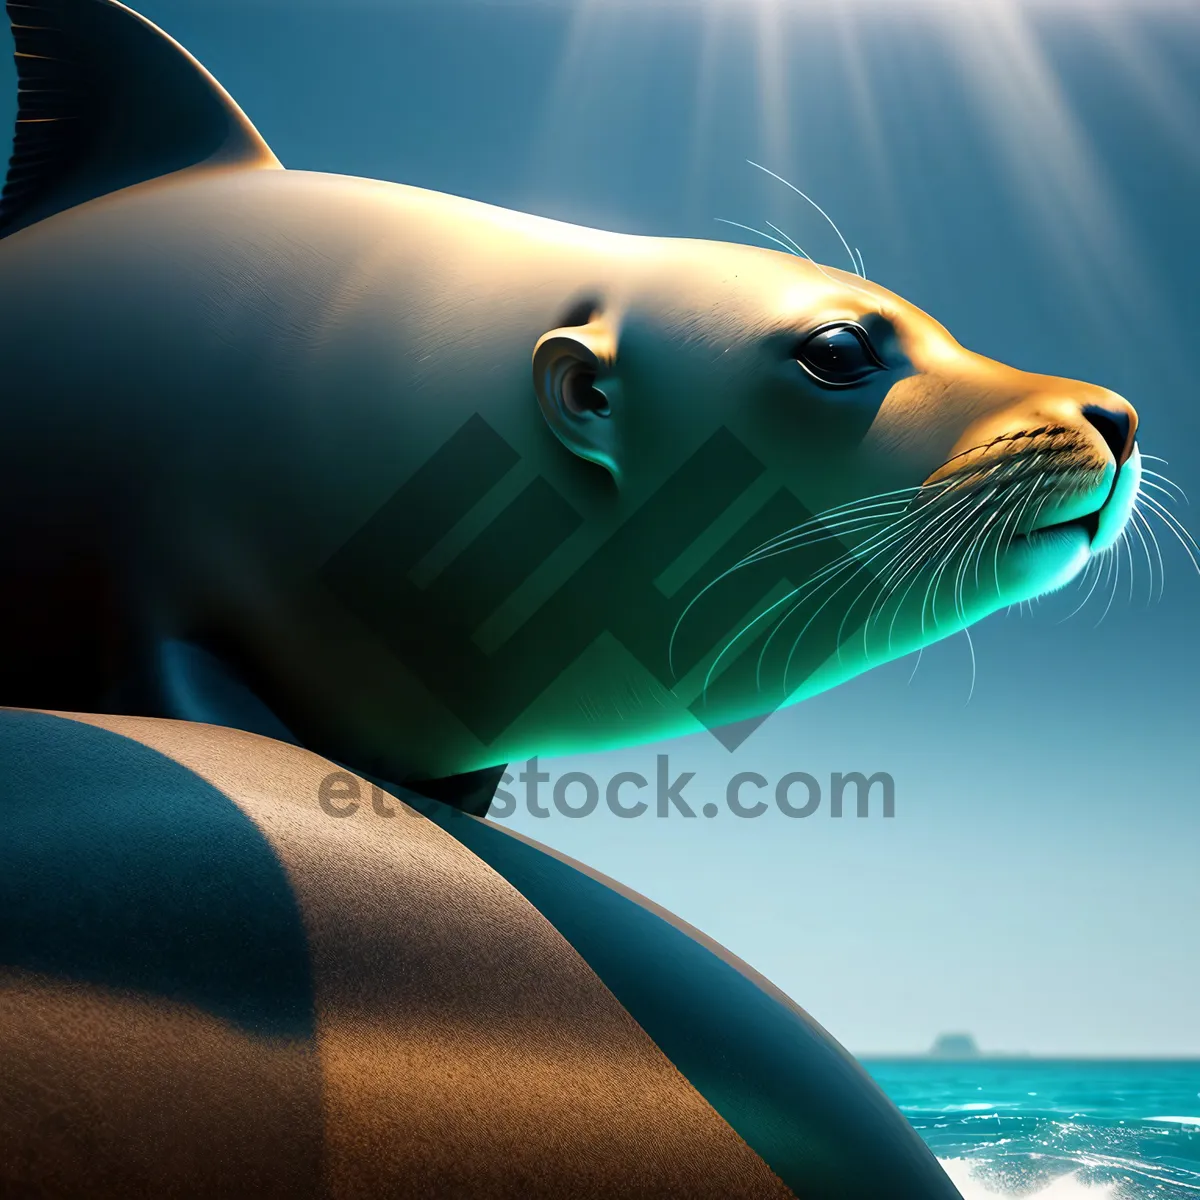 Picture of Playful Sea Lion Splashing in the Ocean